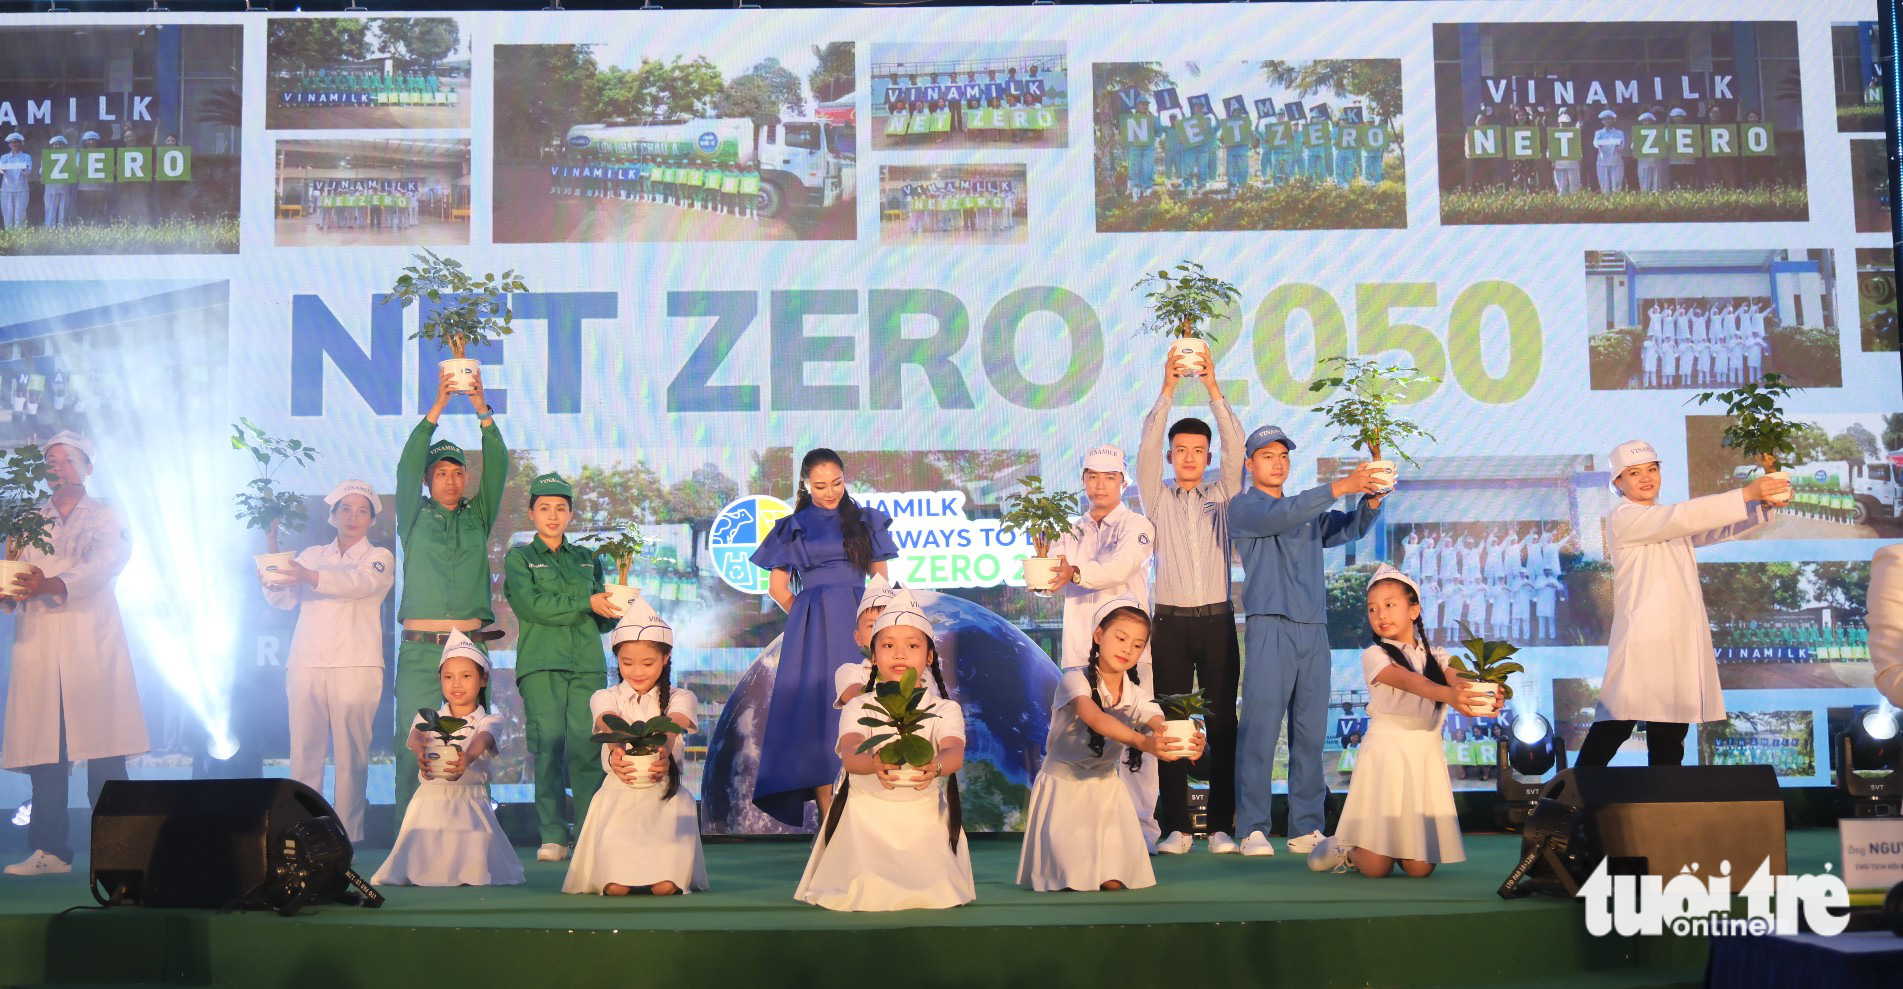 A performance highlights the determination of building a better and greener world. Photo: Doan Hoa / Tuoi Tre